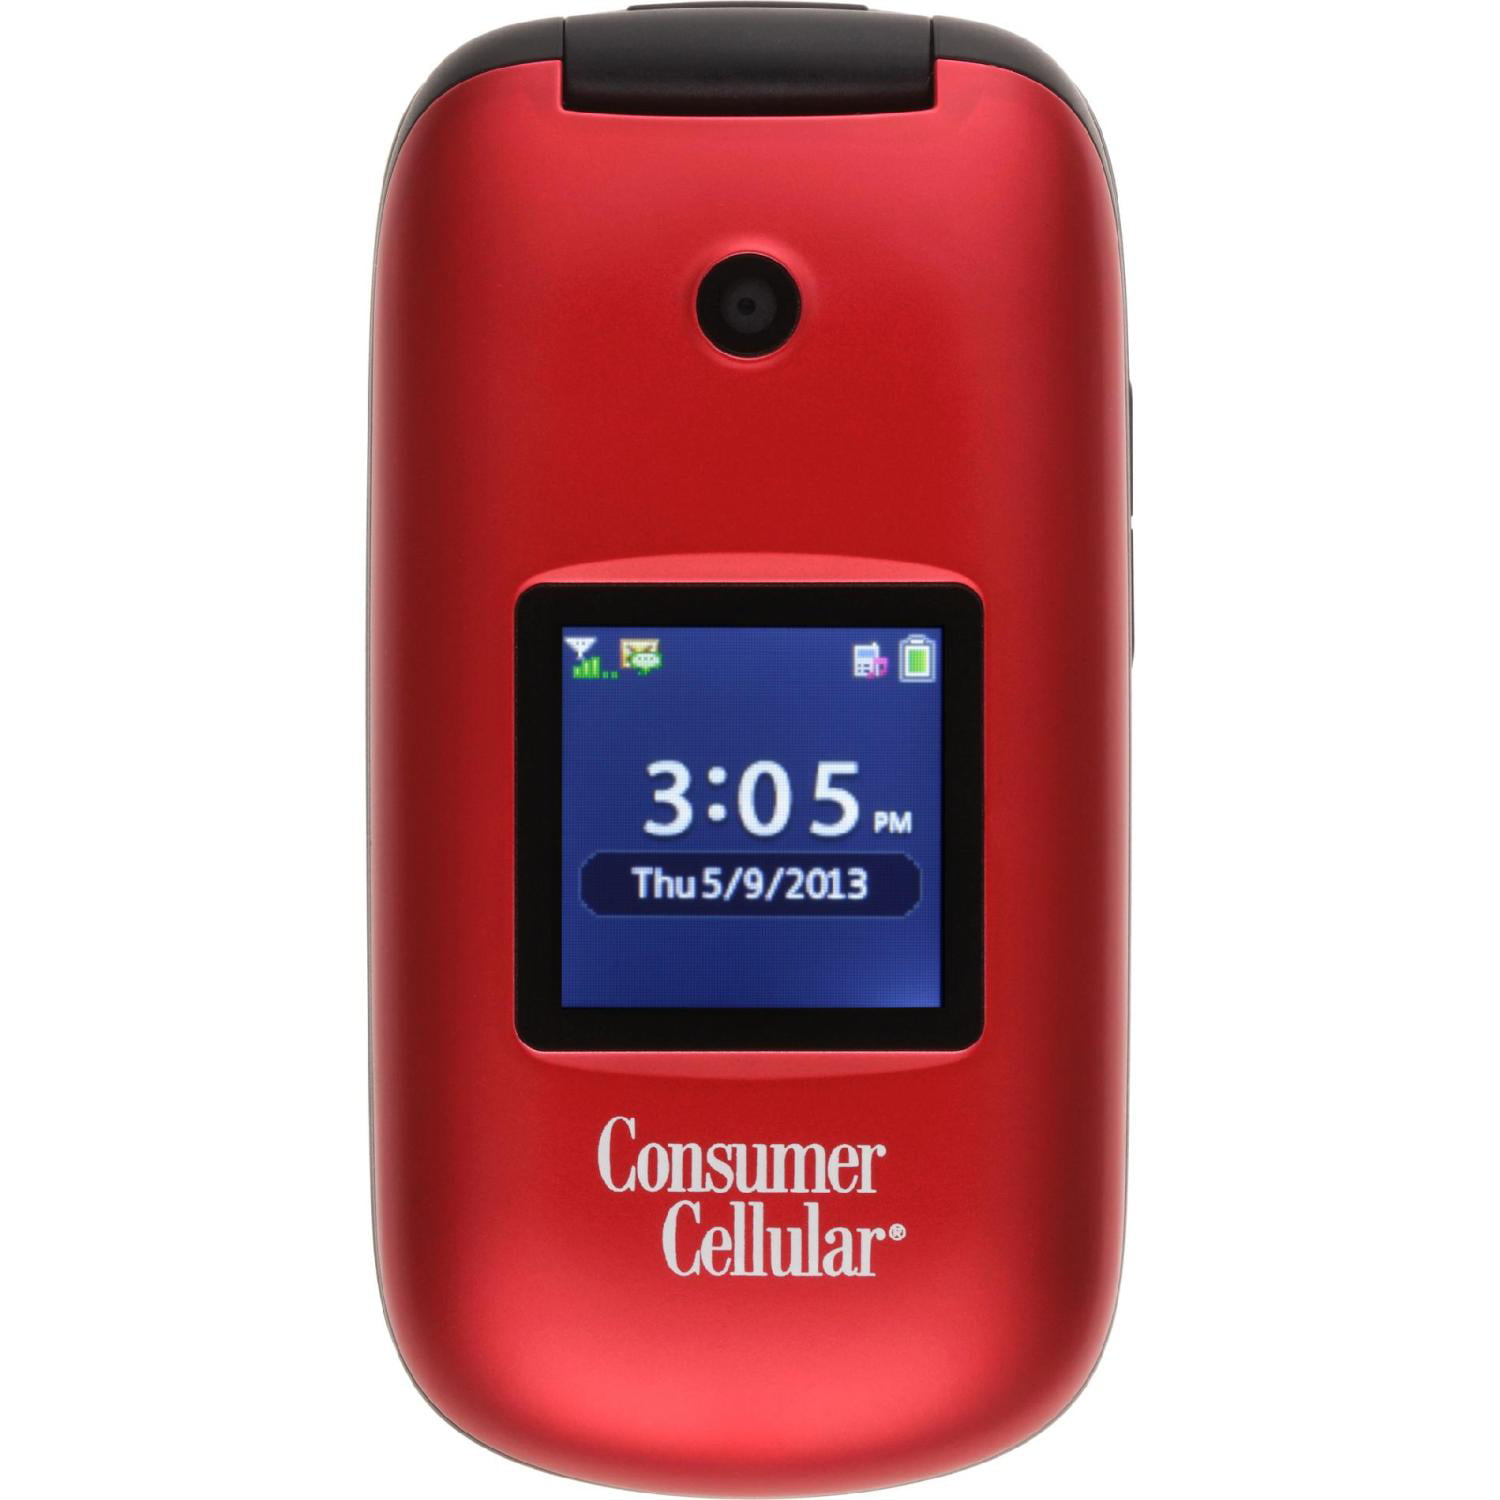 CONSUMER CELLULAR TRANSFER DATA TO NEW PHONE